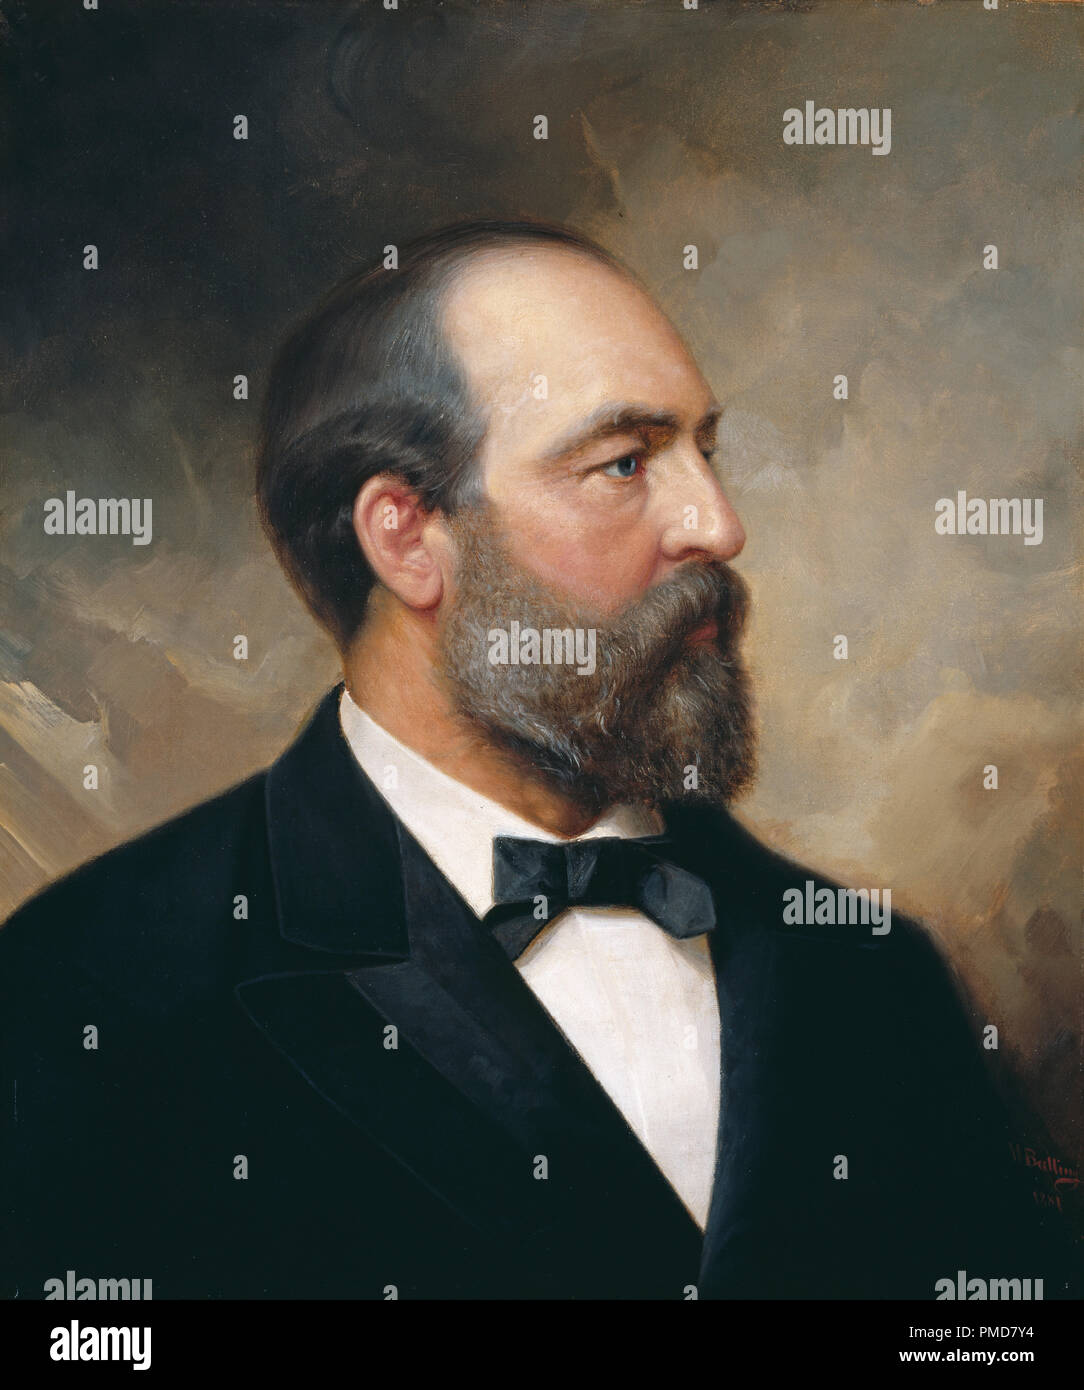 Portrait of James Garfield, 20th President of the United States (1831-1881). Date/Period: 1881. Painting. Oil on canvas. Height: 61.6 cm (24.2 in); Width: 51.8 cm (20.3 in). Author: OLE PETER HANSEN BALLING. Stock Photo